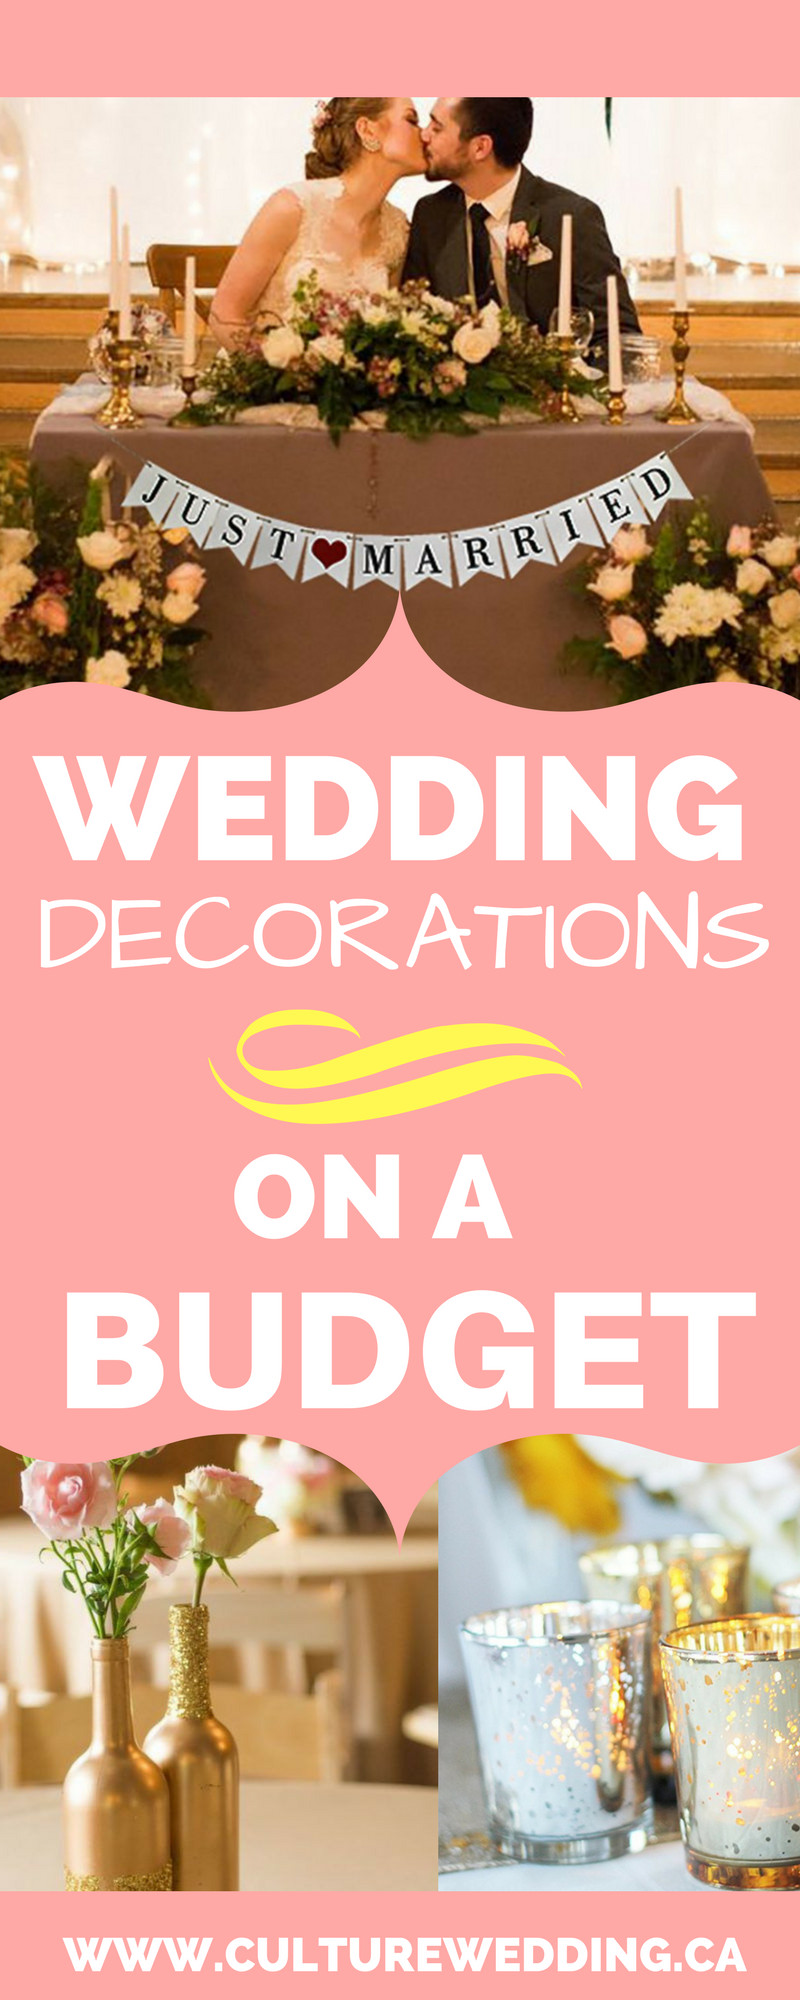 Wedding Decor Ideas On A Budget
 How to Wedding Decorations on a Bud Get them now